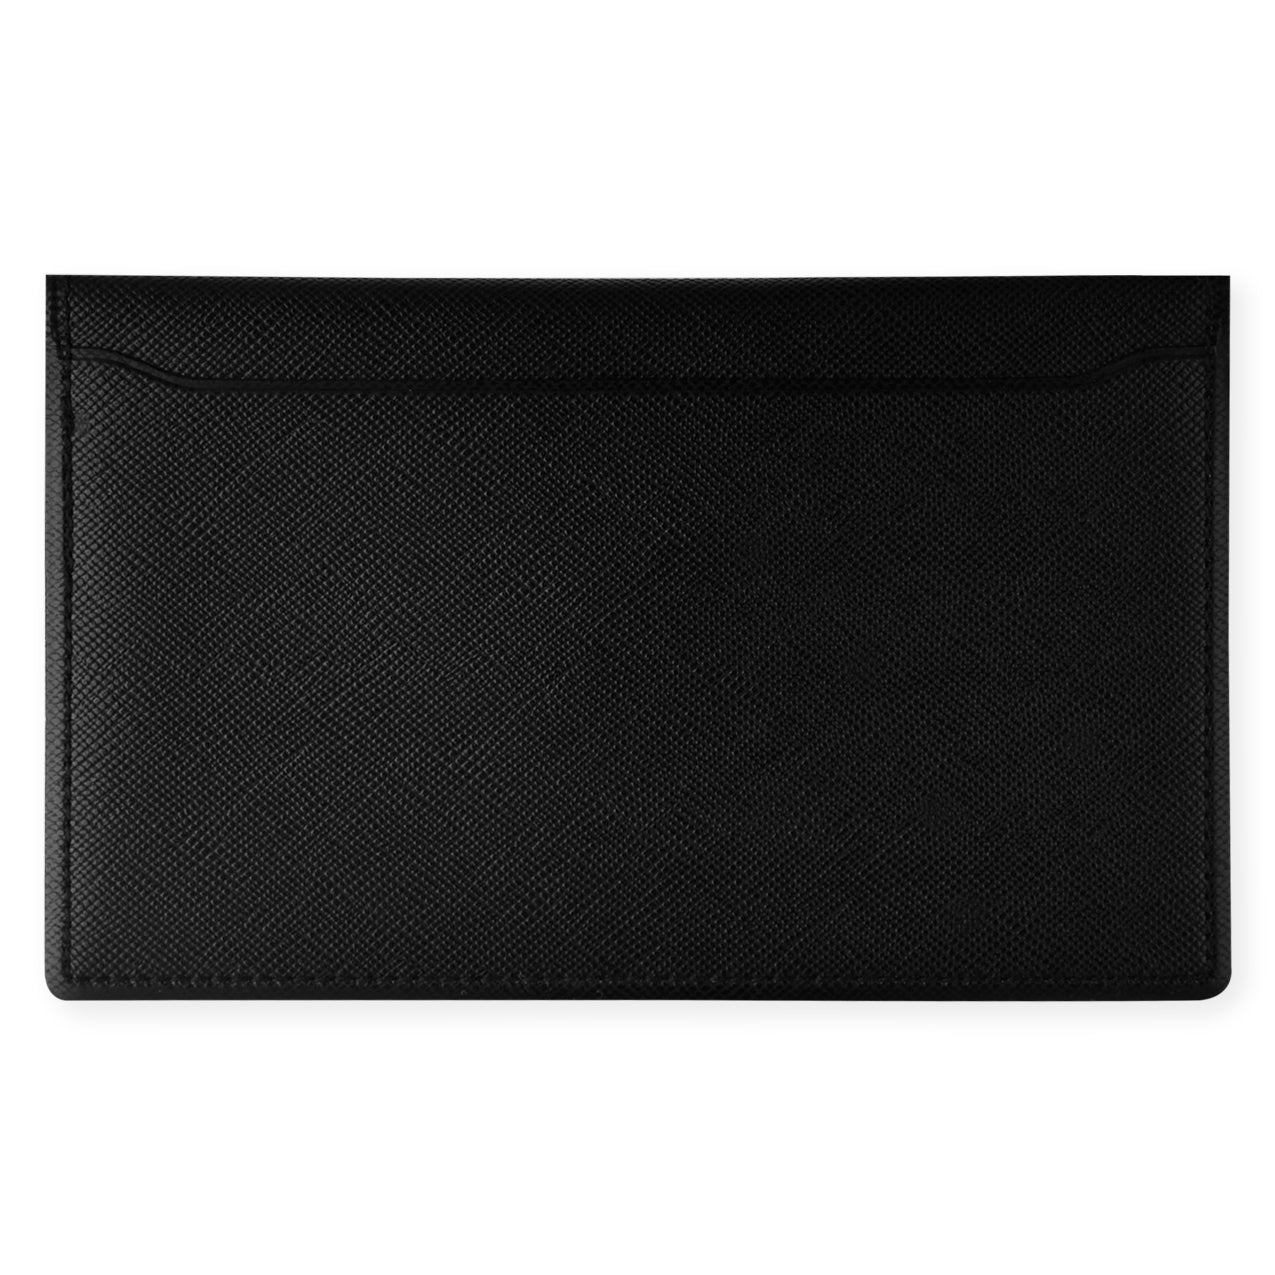 Null Quitterie Multi-Card Case Pouch Black 